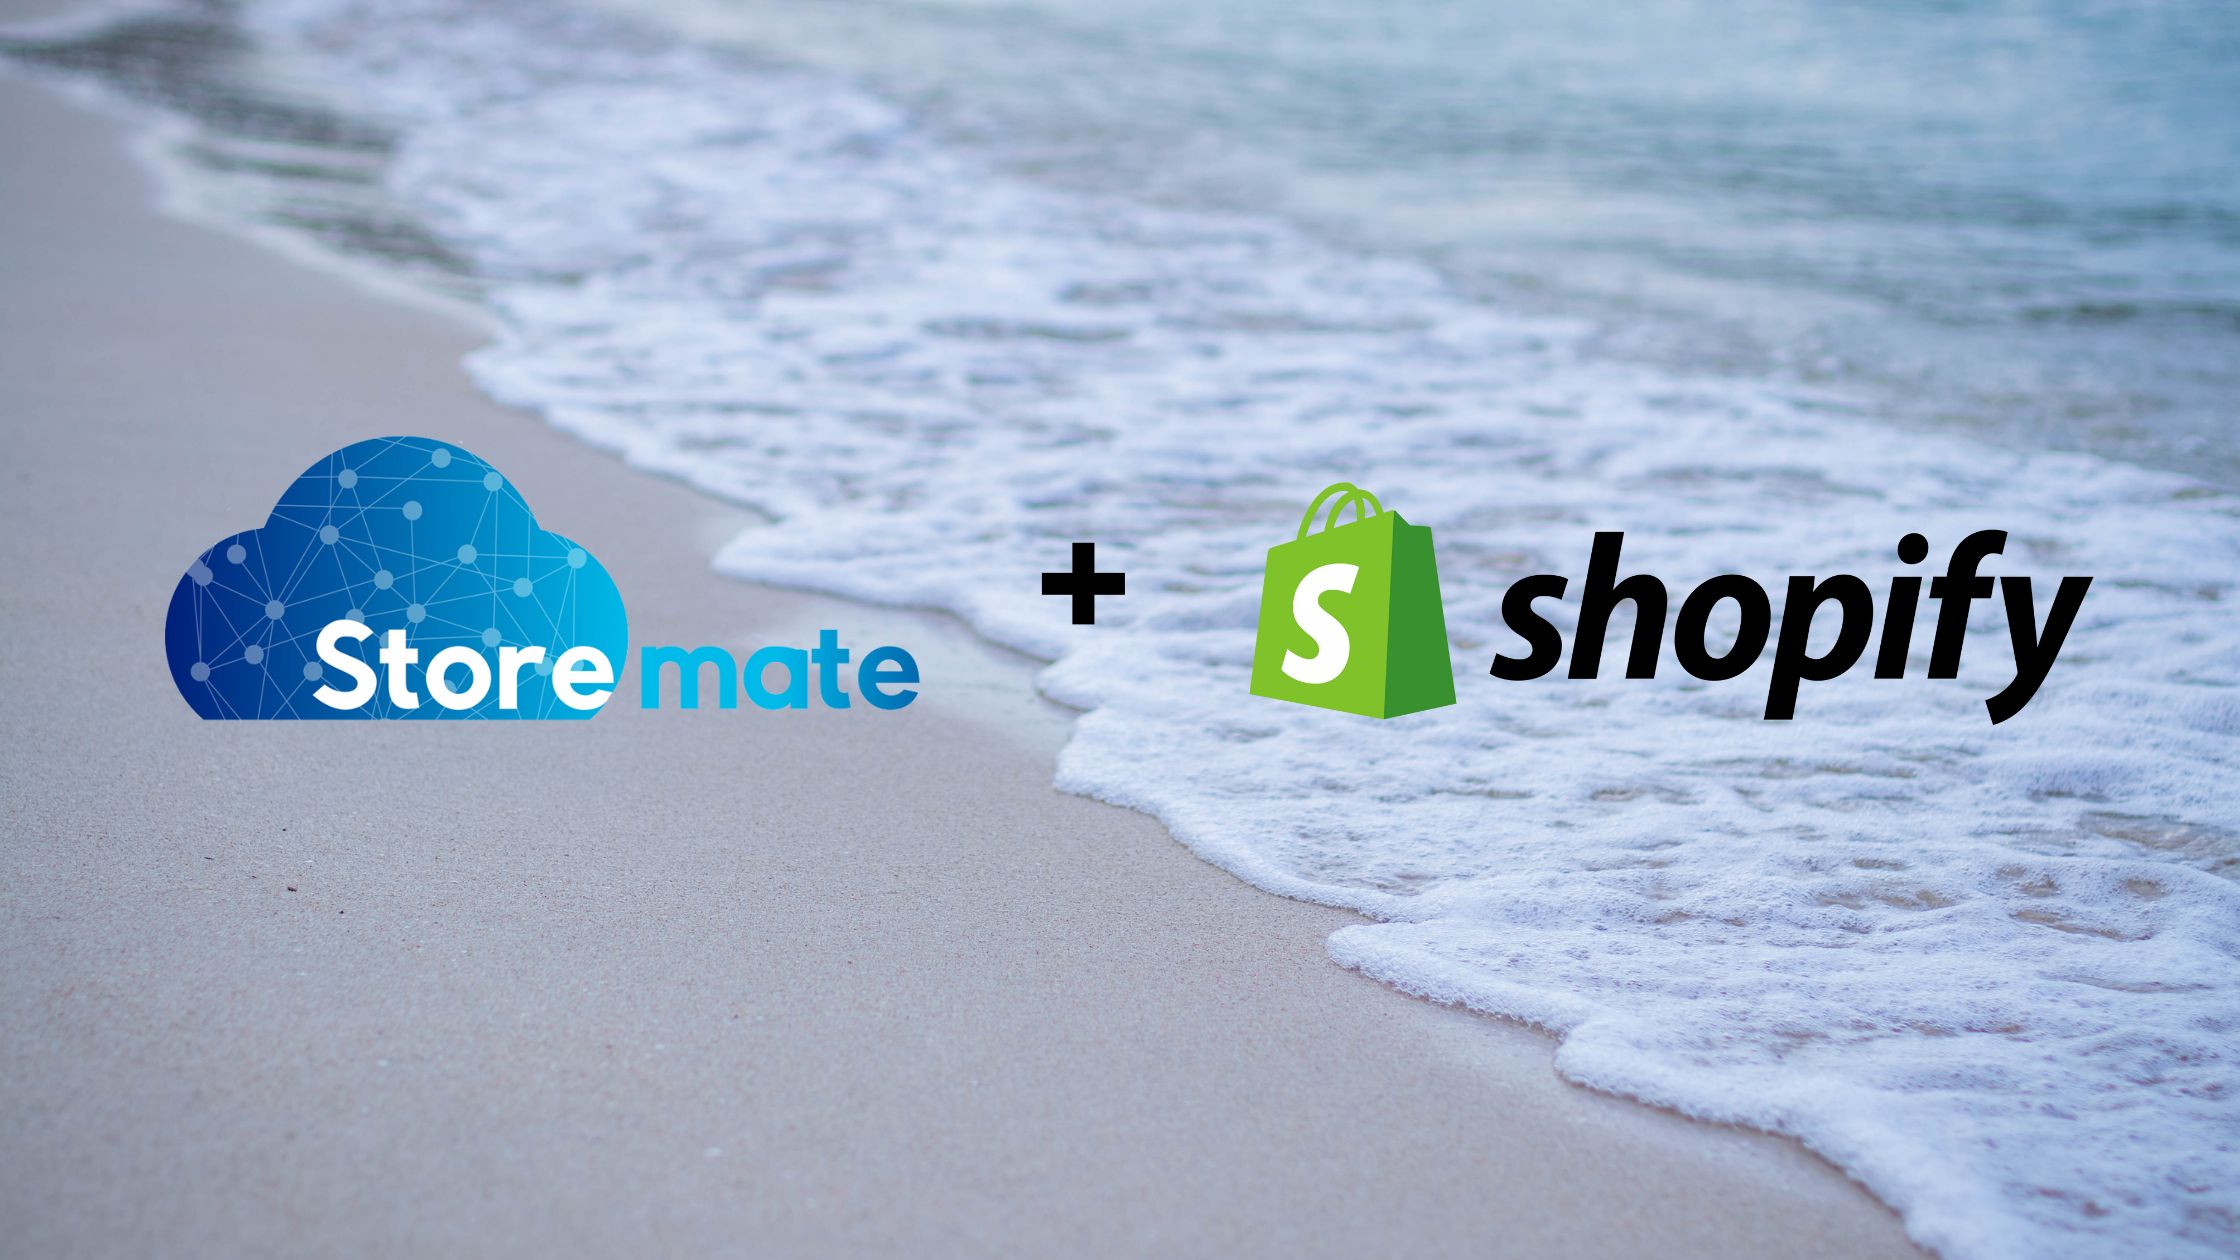 Shopify integrations with Stormate